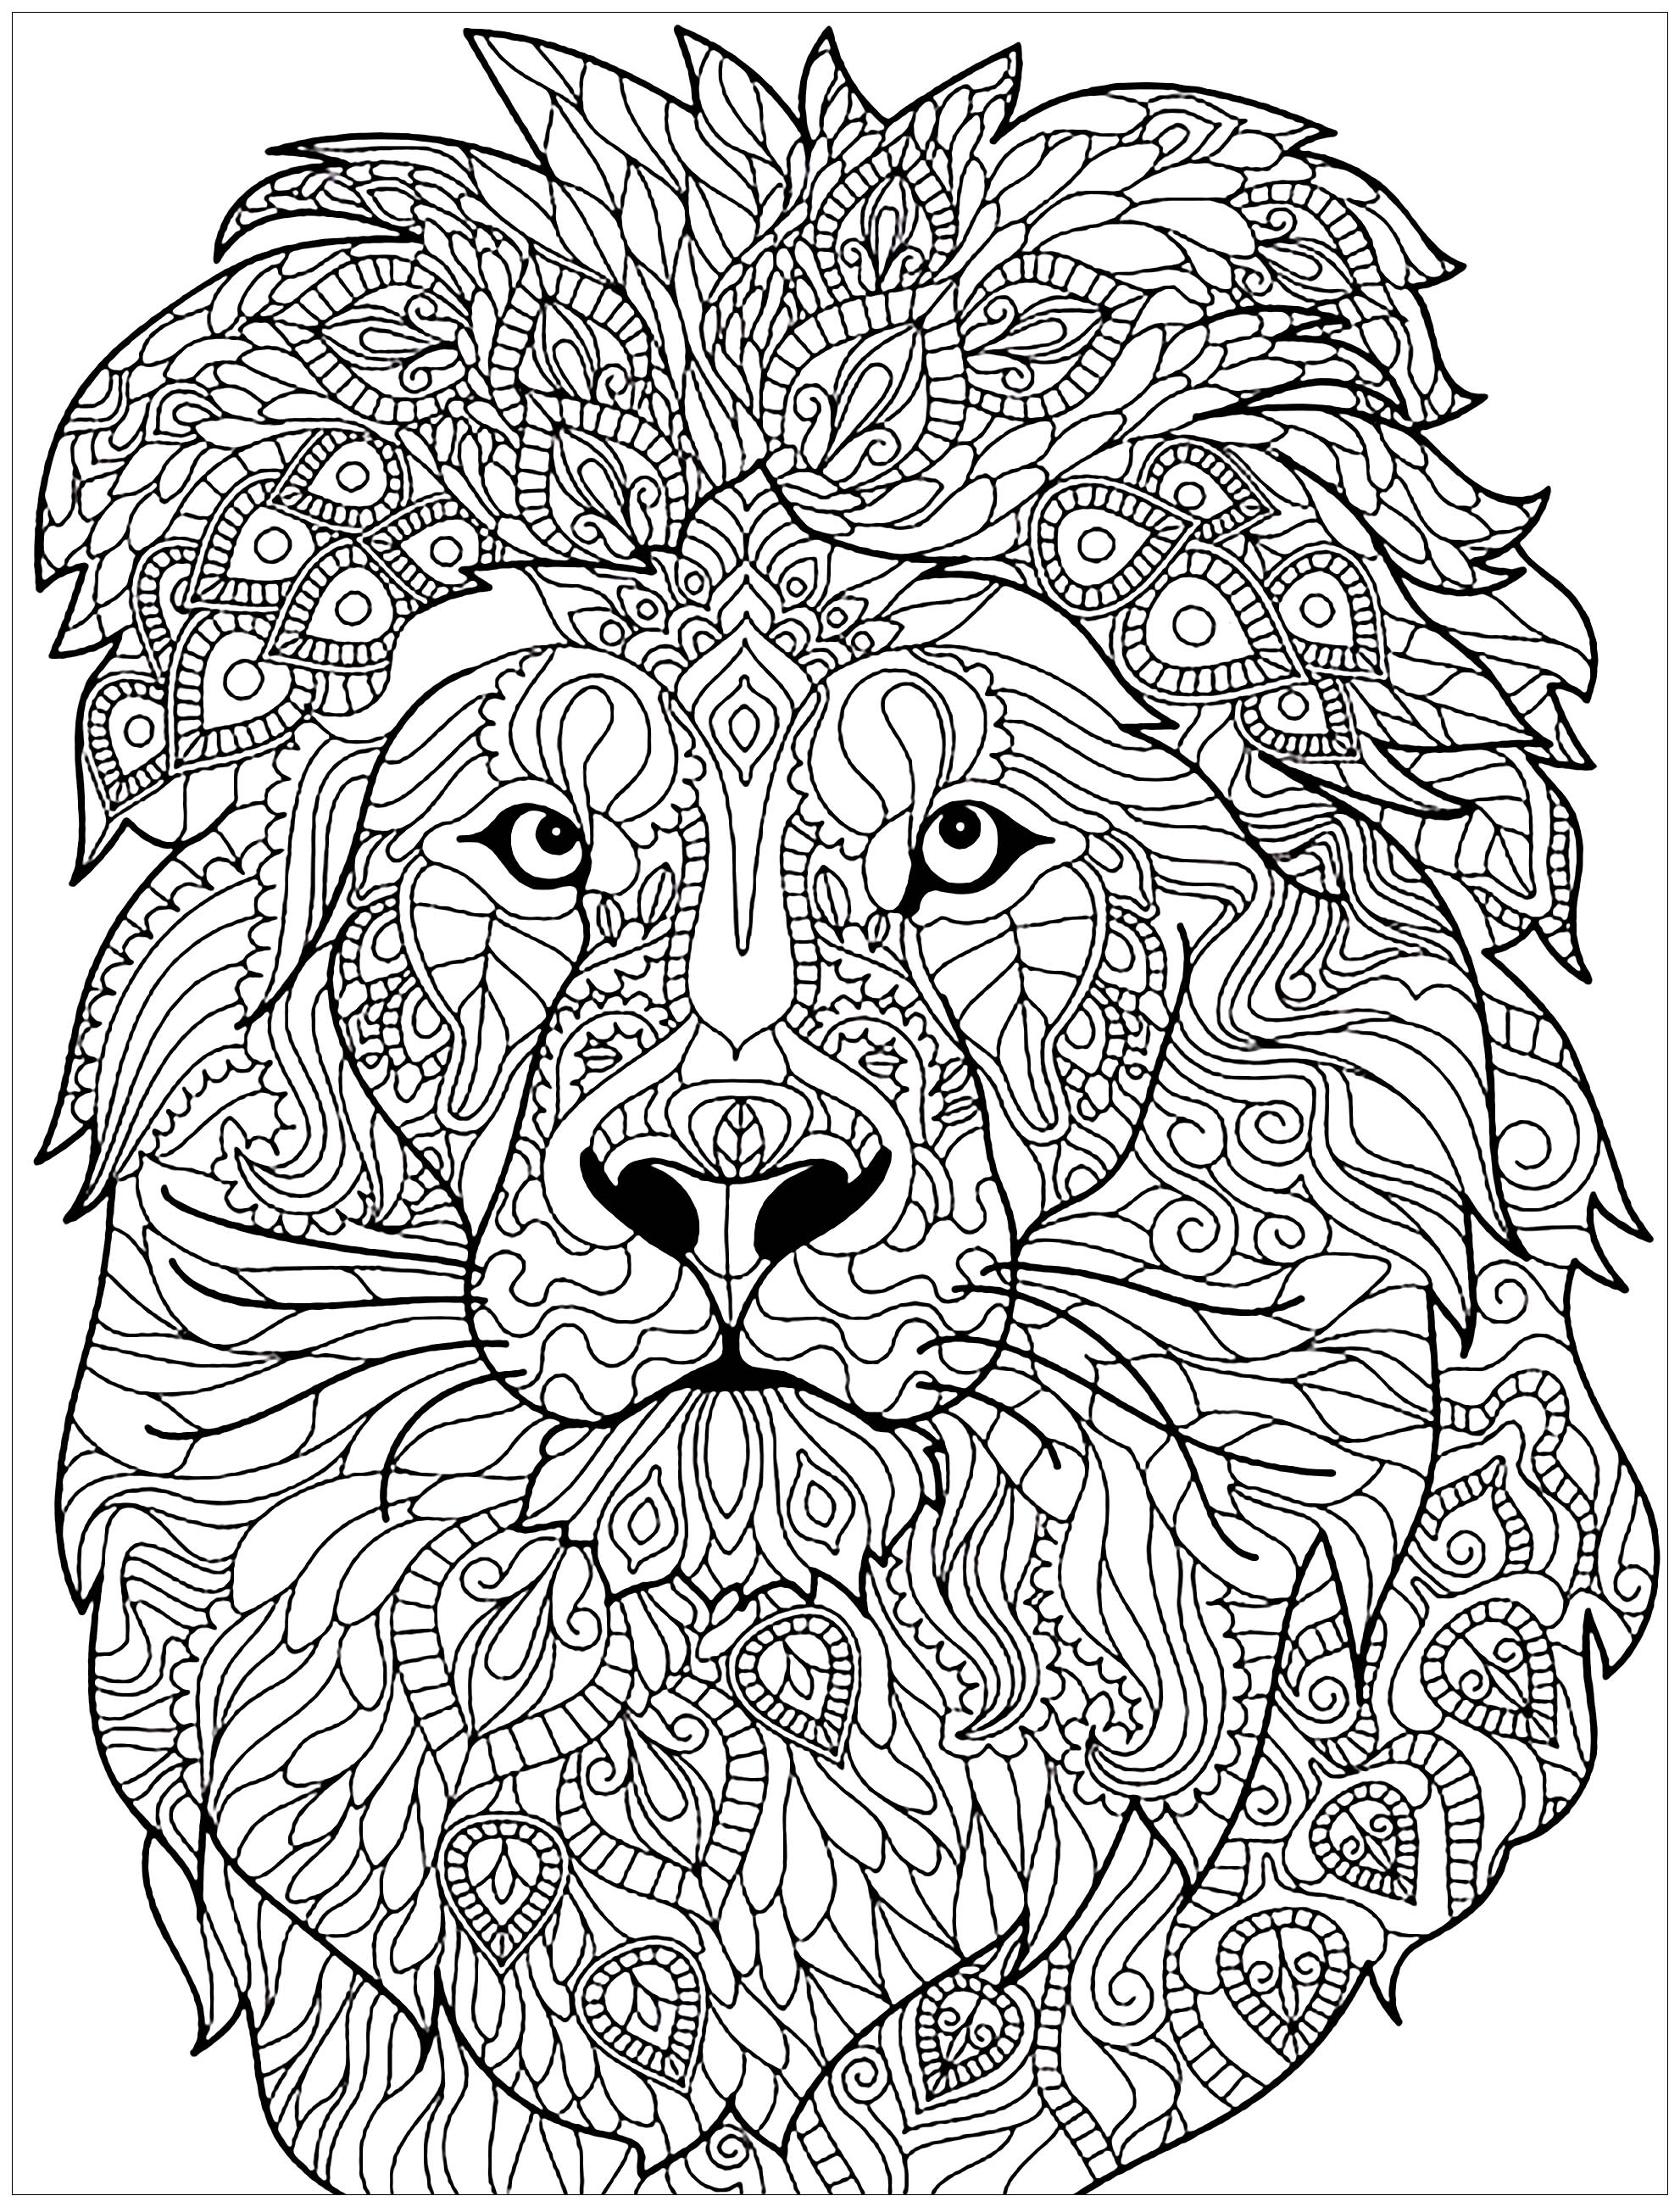 Complex Animal Coloring Pages at Free printable